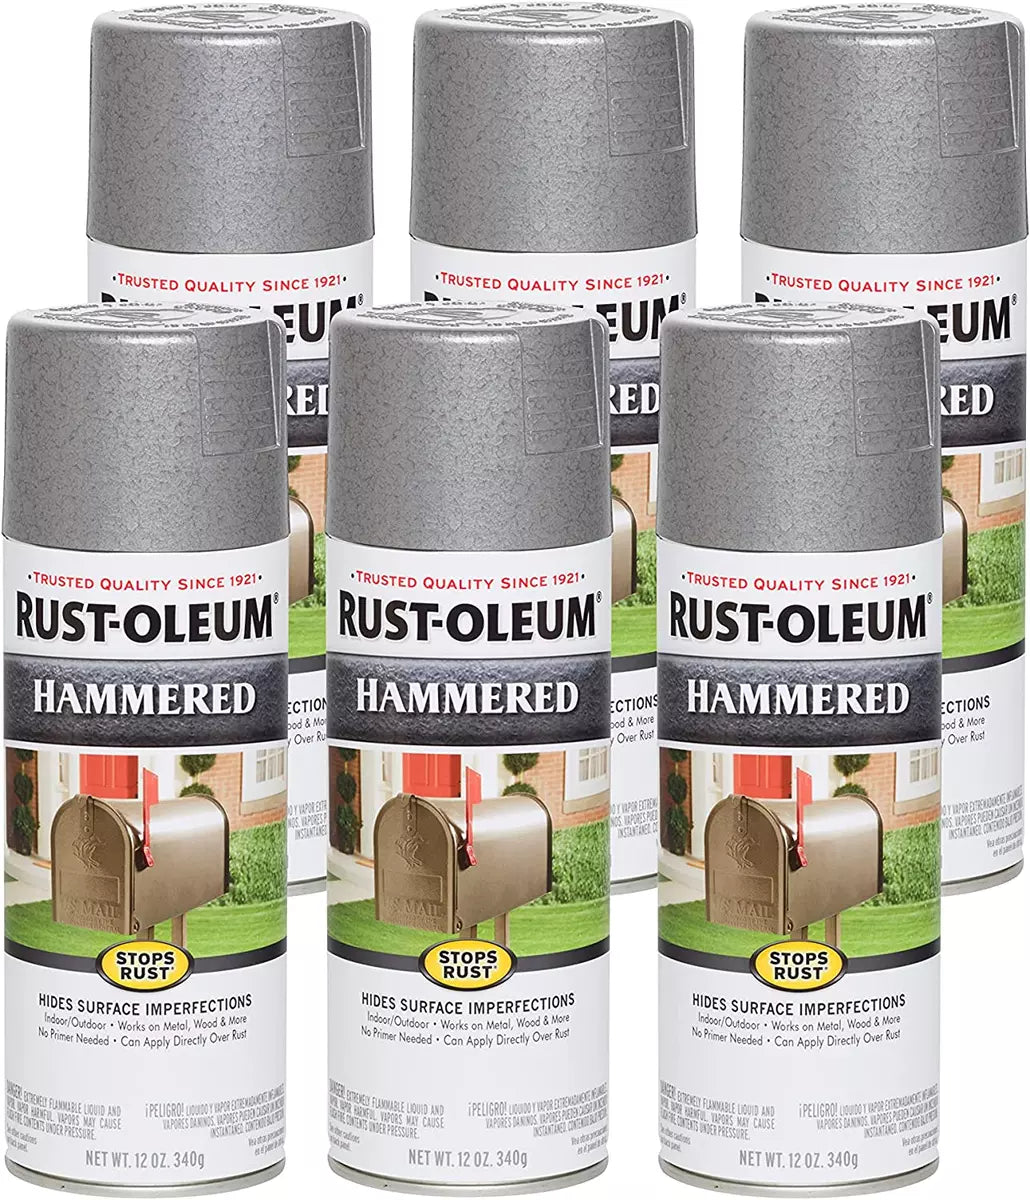 Rust-Oleum 7213830 Hammered Metal Finish Spray, Silver, 340g (6 CANS) - South East Clearance Centre